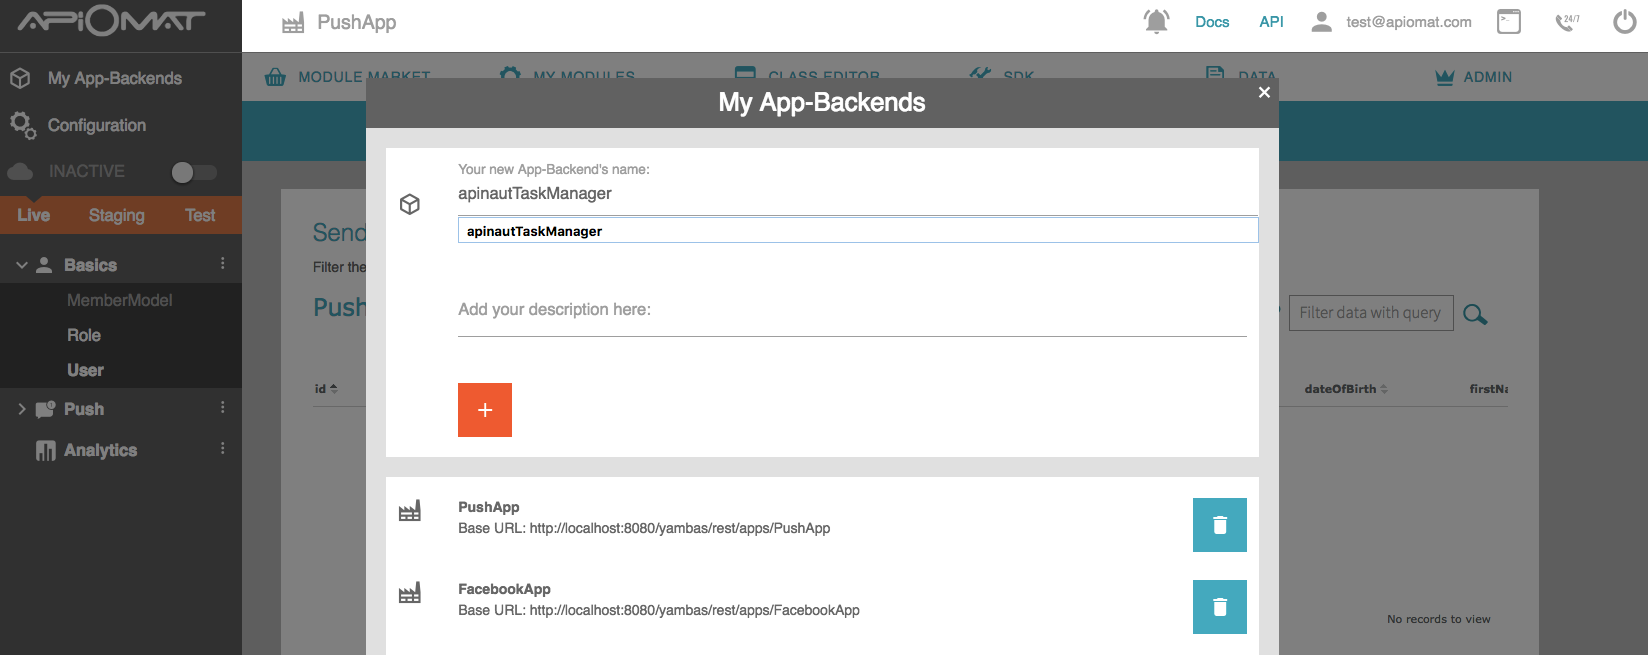 images/download/attachments/61478753/taskManager_newBackend.png